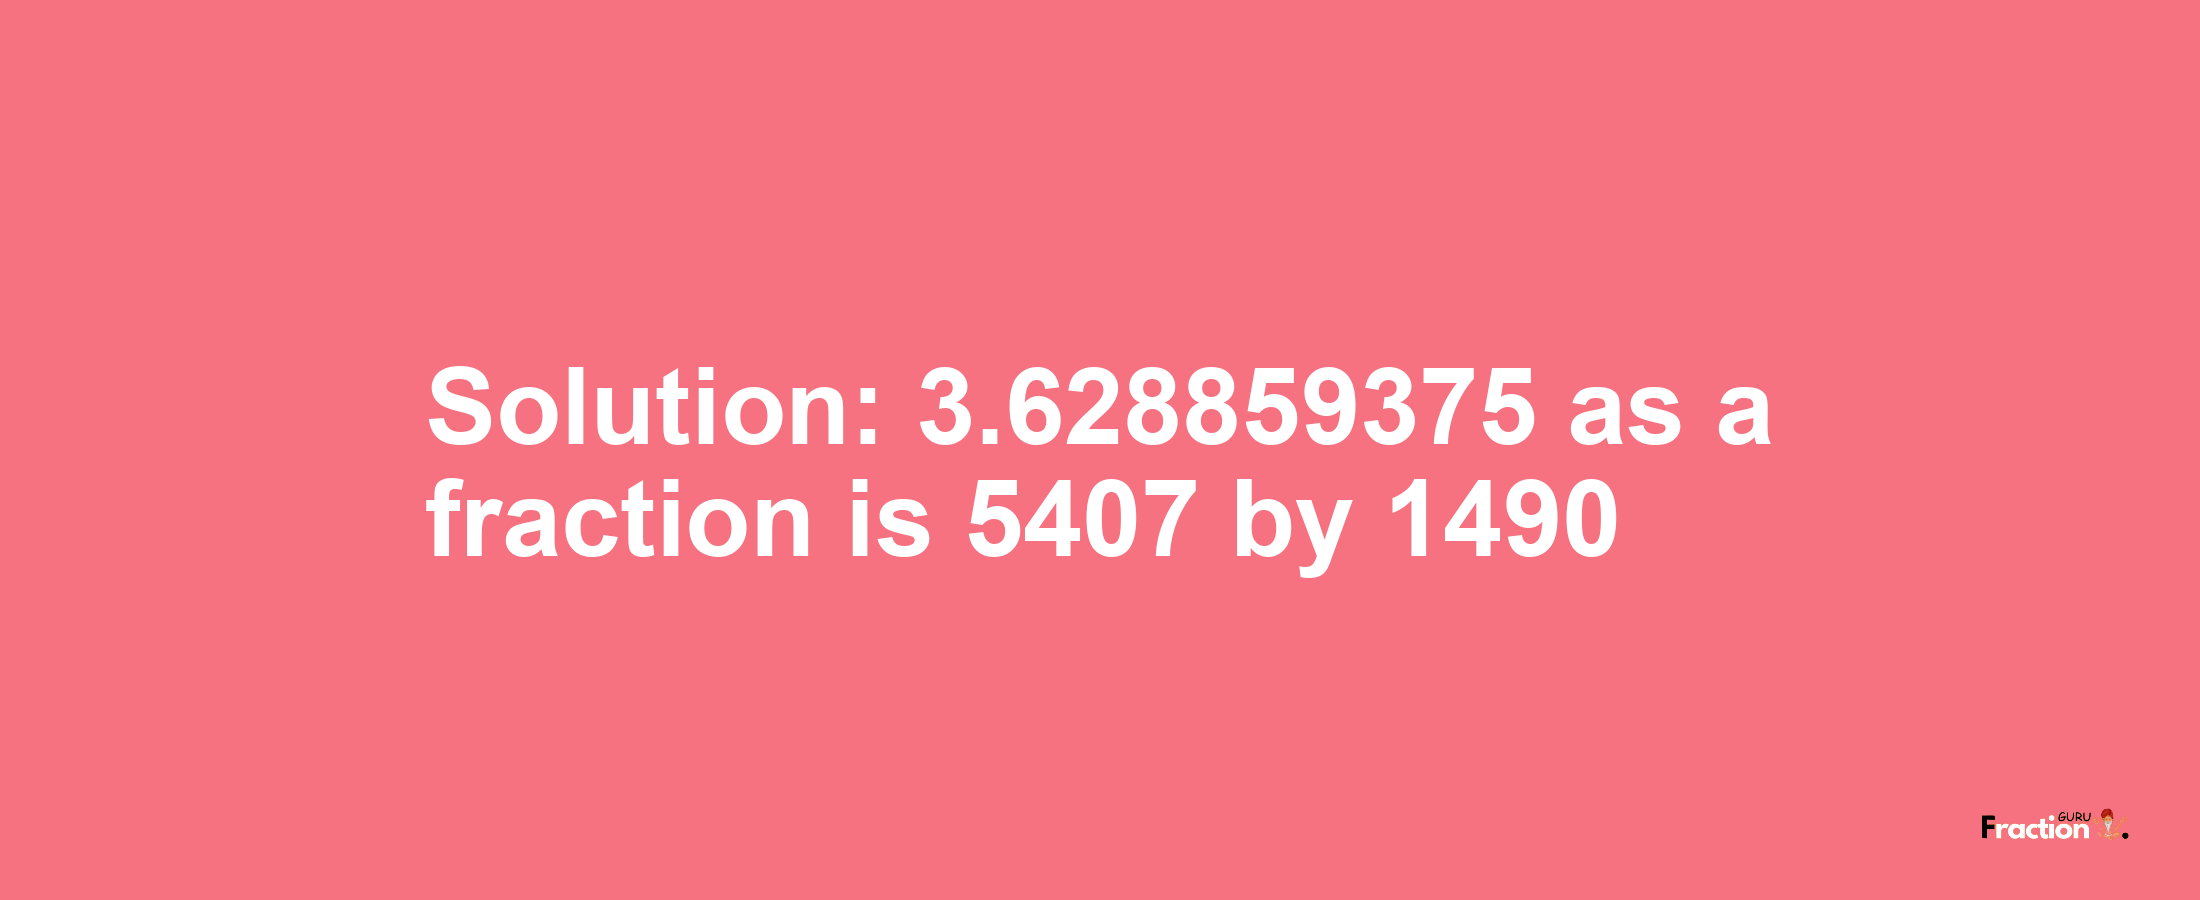 Solution:3.628859375 as a fraction is 5407/1490